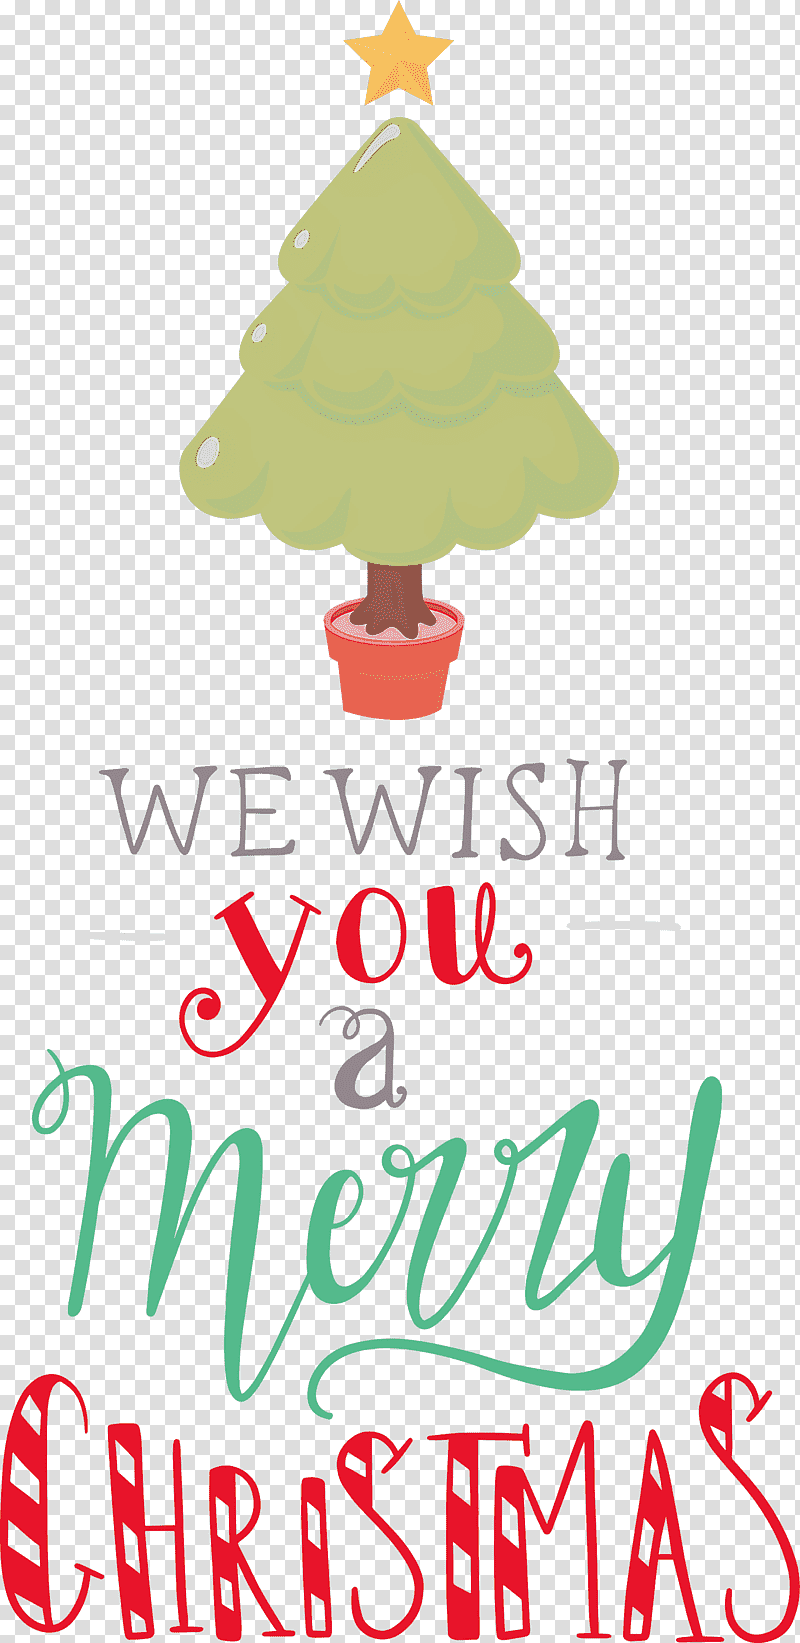 Merry Christmas We Wish You A Merry Christmas, Christmas Tree, Christmas Day, Holiday Ornament, Christmas Ornament, Christmas Ornament M, Meter transparent background PNG clipart